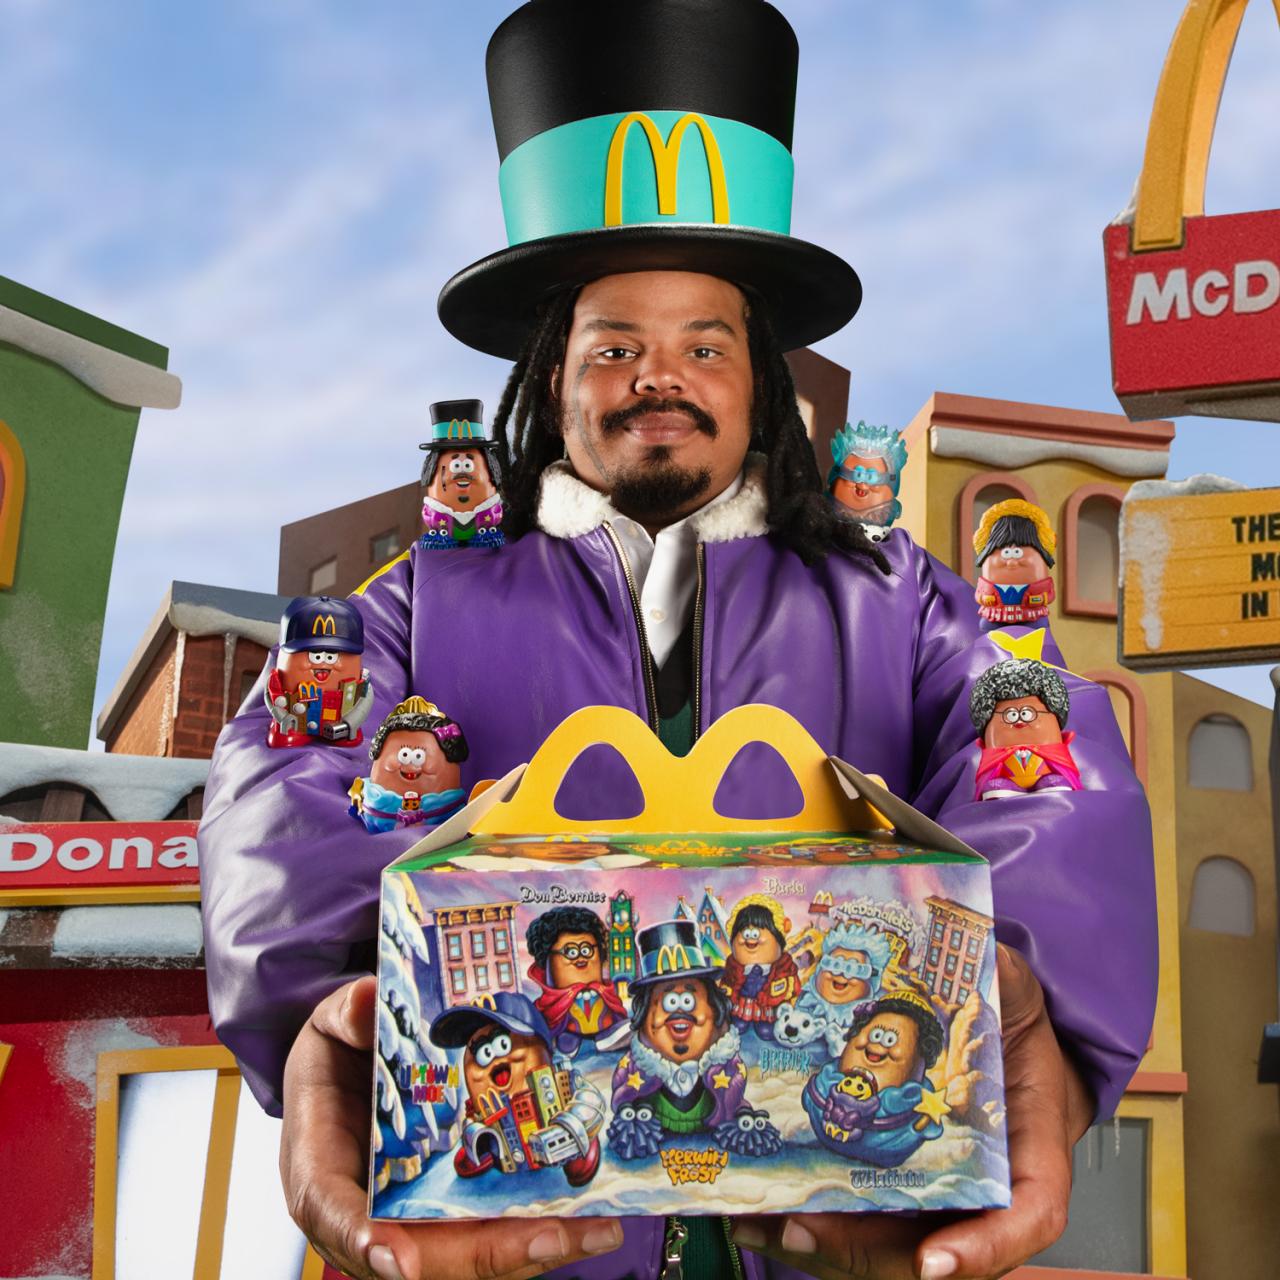 McDonald's Has a New Adult Happy Meal Featuring 'McNugget Buddies